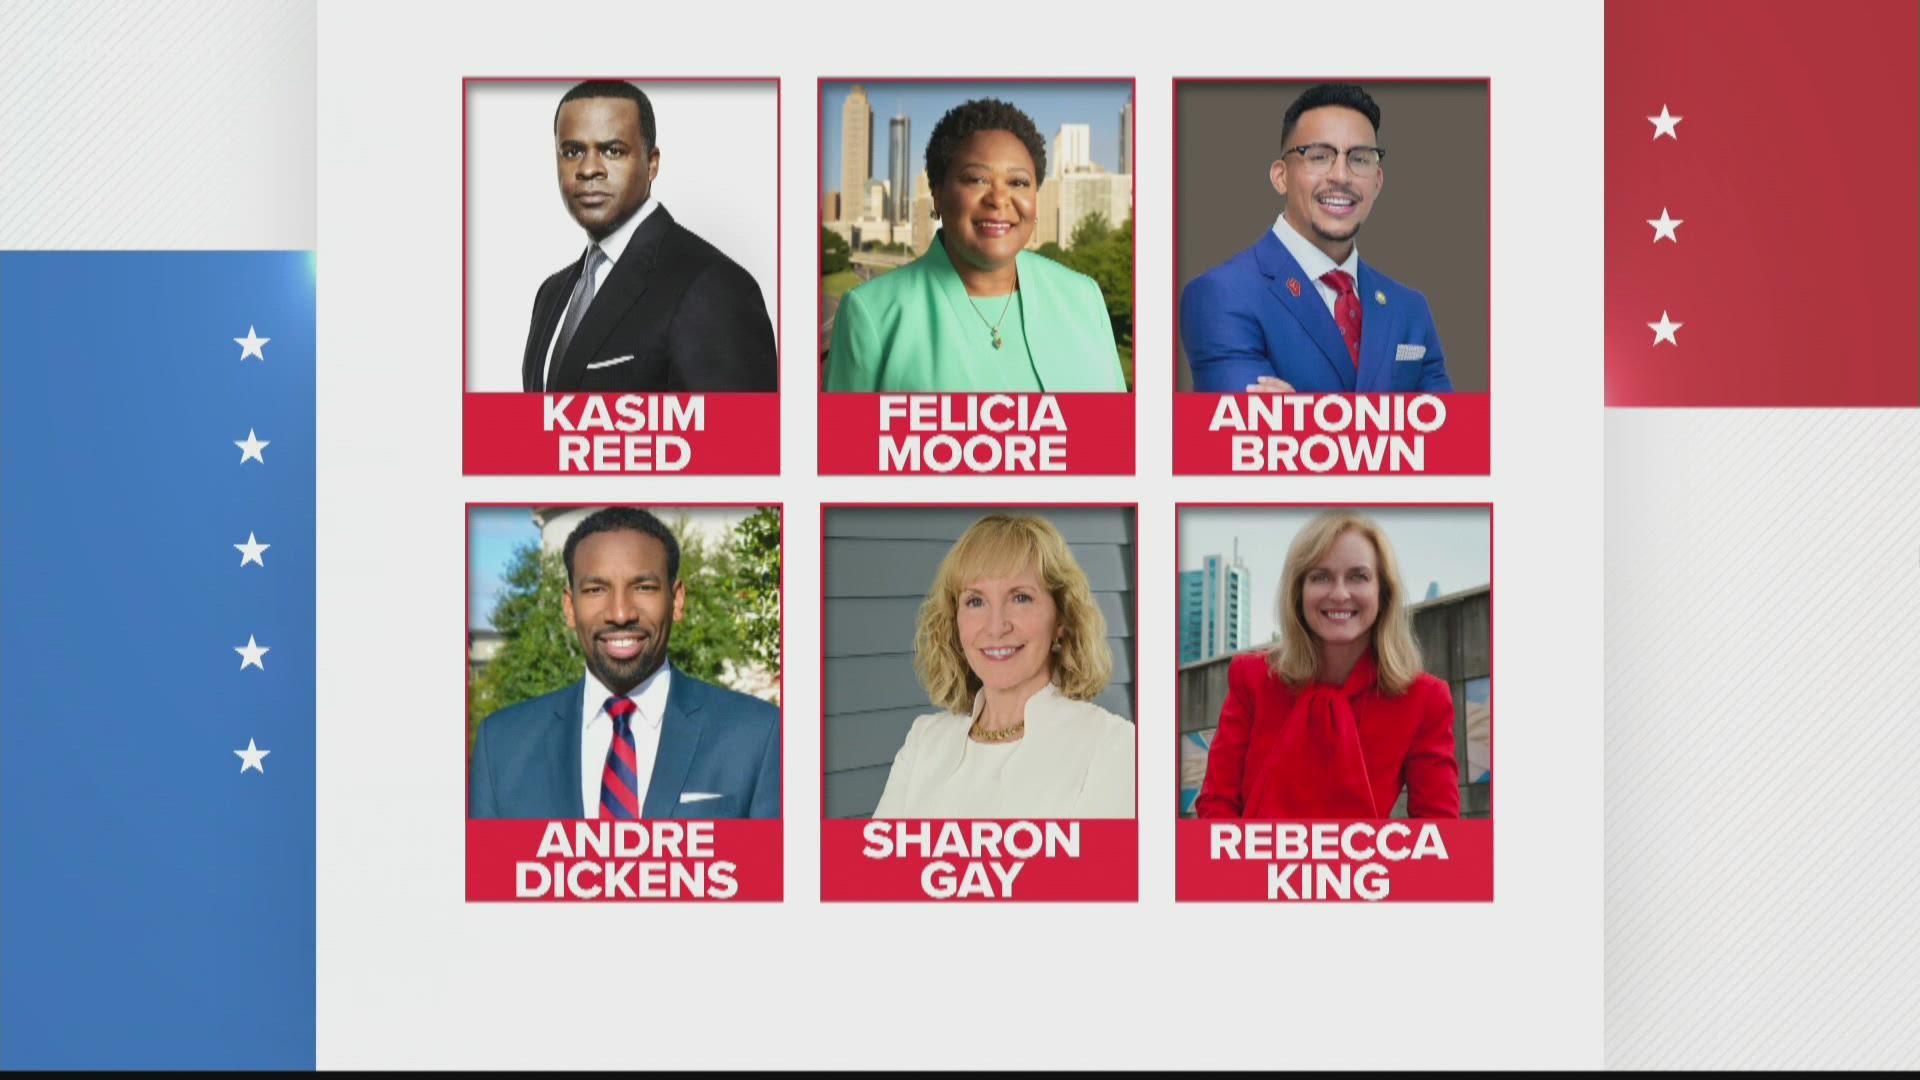 Six candidates running for mayor in Atlanta face off on Oct. 13, 2021 for a debate about important issues.